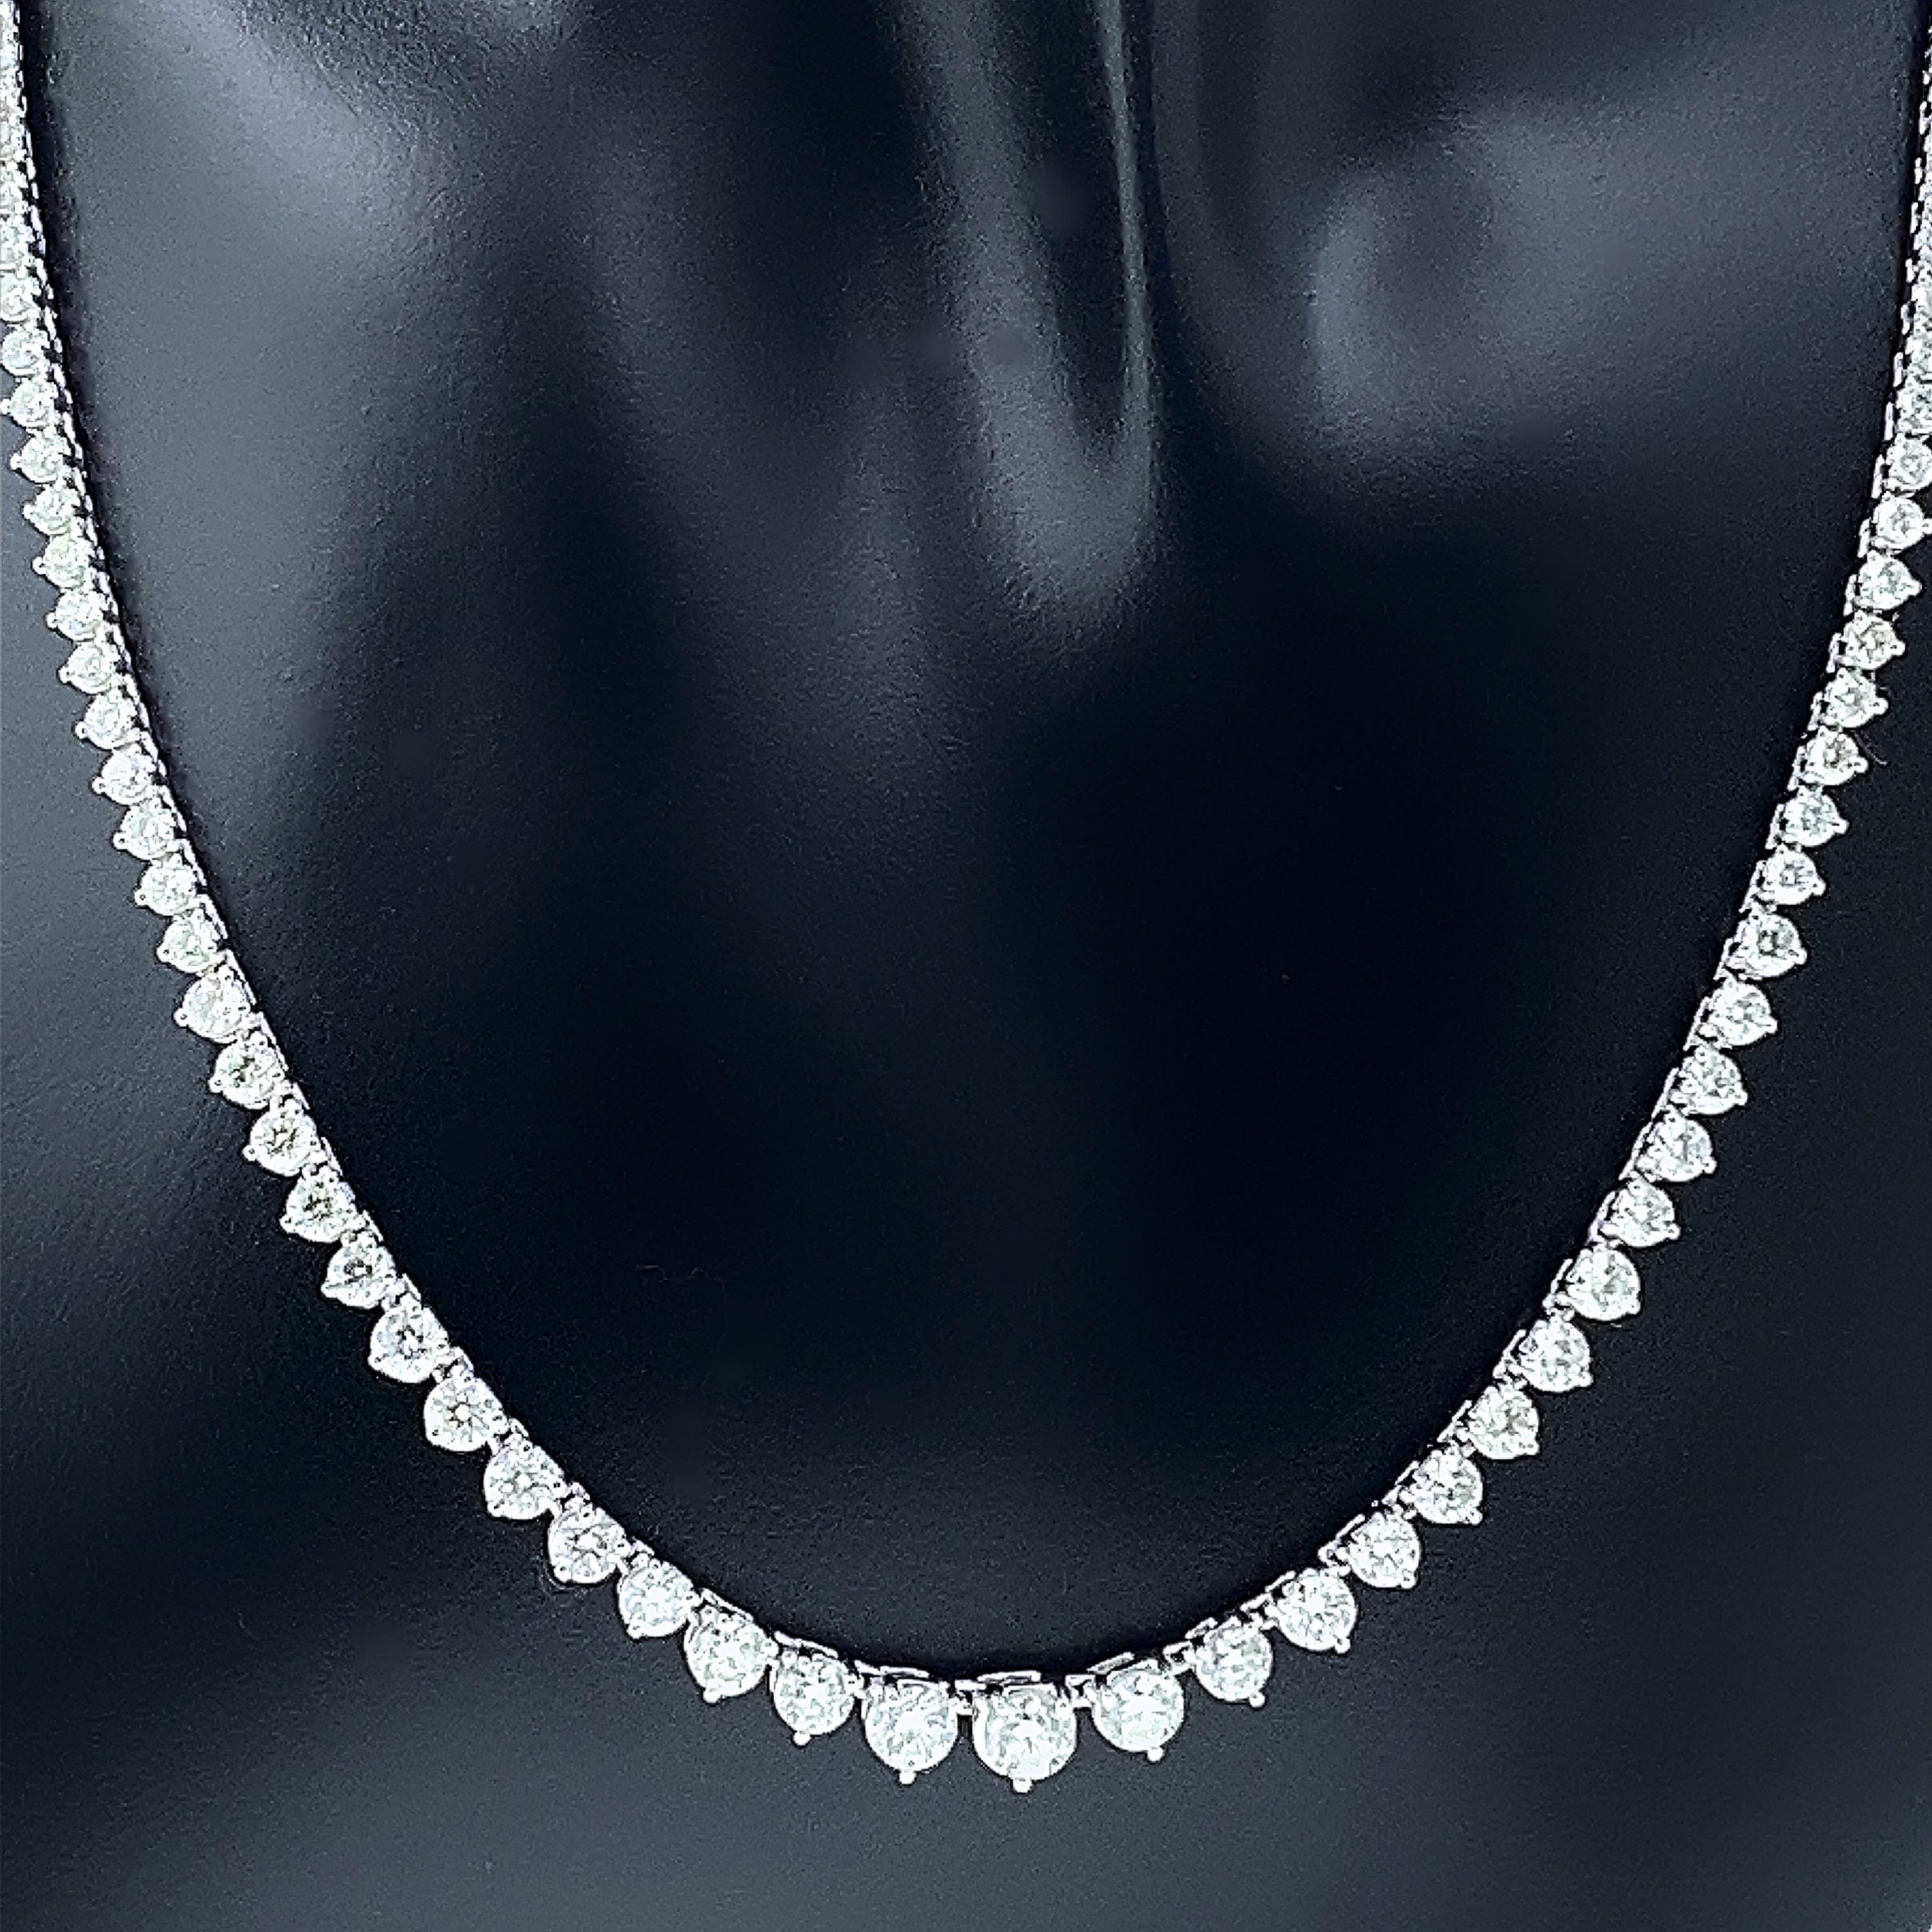 Women's or Men's Diamond Riviera Necklace 7.00 tcw in 14kt White Gold